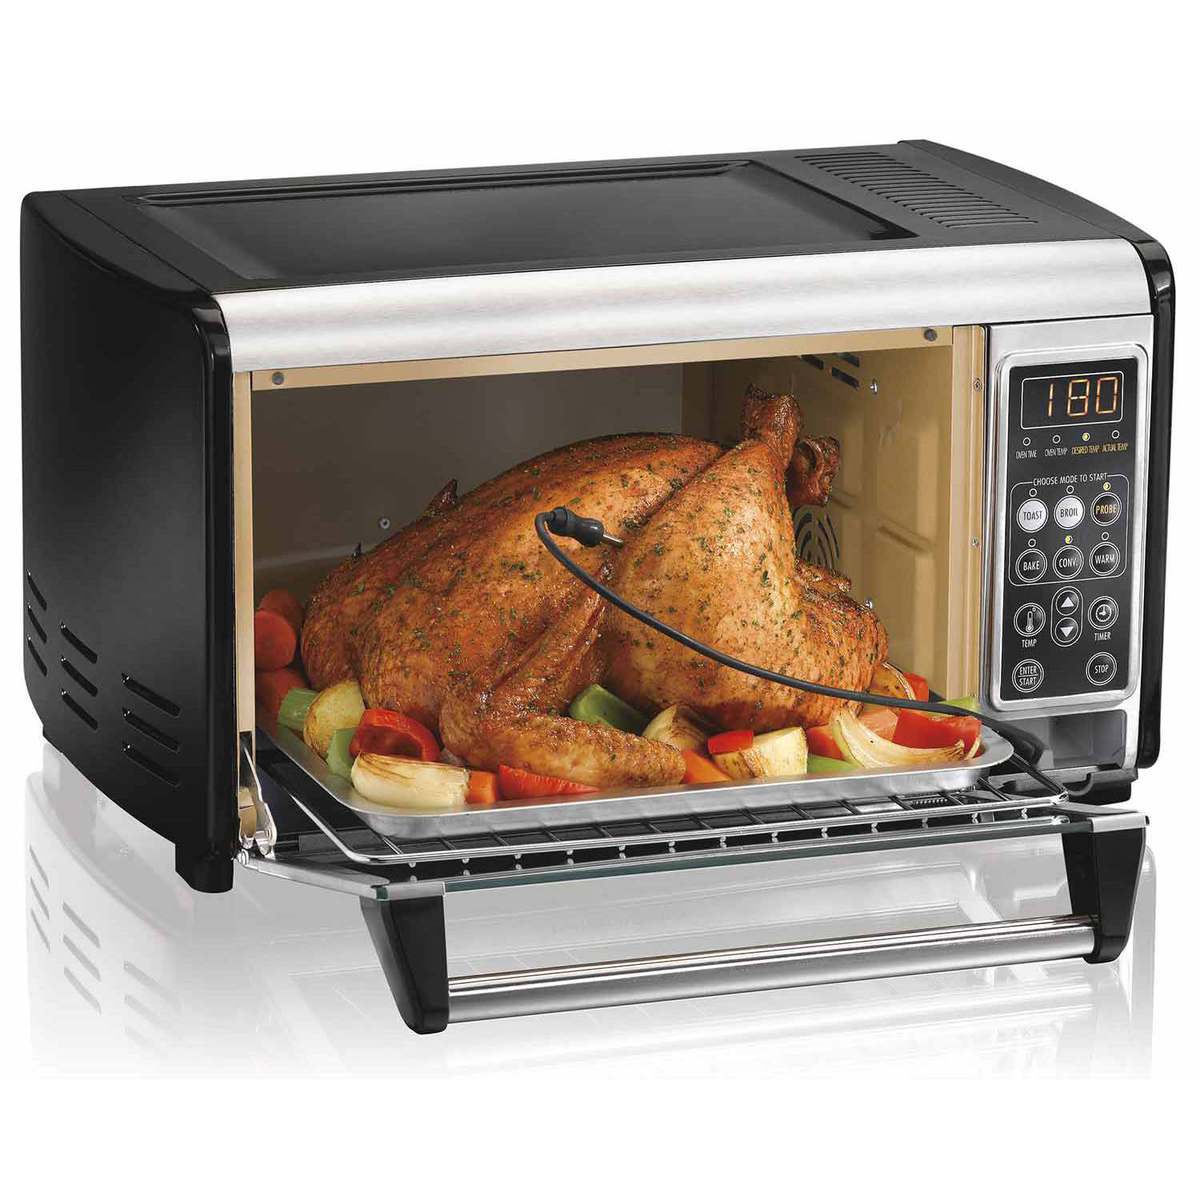 Set & Forget™ Toaster Oven with Convection Cooking (31230)